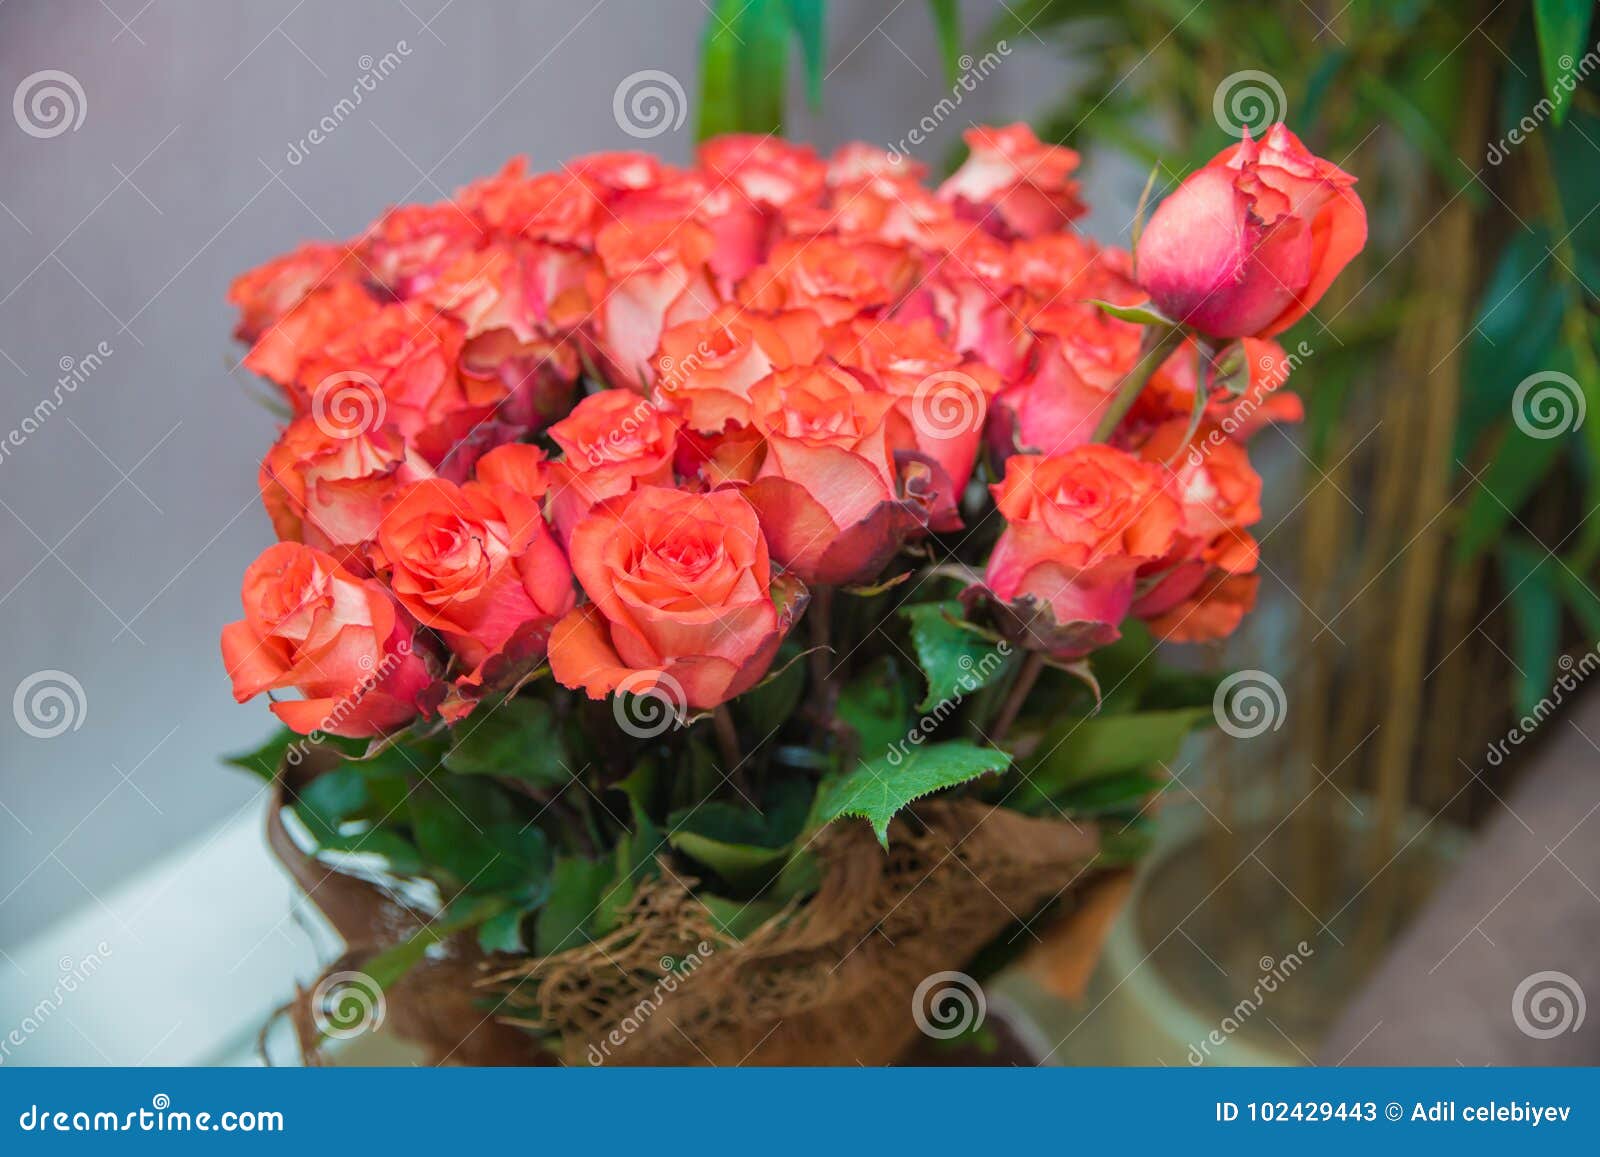 A Bouquet Of Flowers Bouquet Of A Hundred Pink Roses Flower Bouquet Of 100 Red Roses Stock Image Image Of Petal Beautiful 102429443